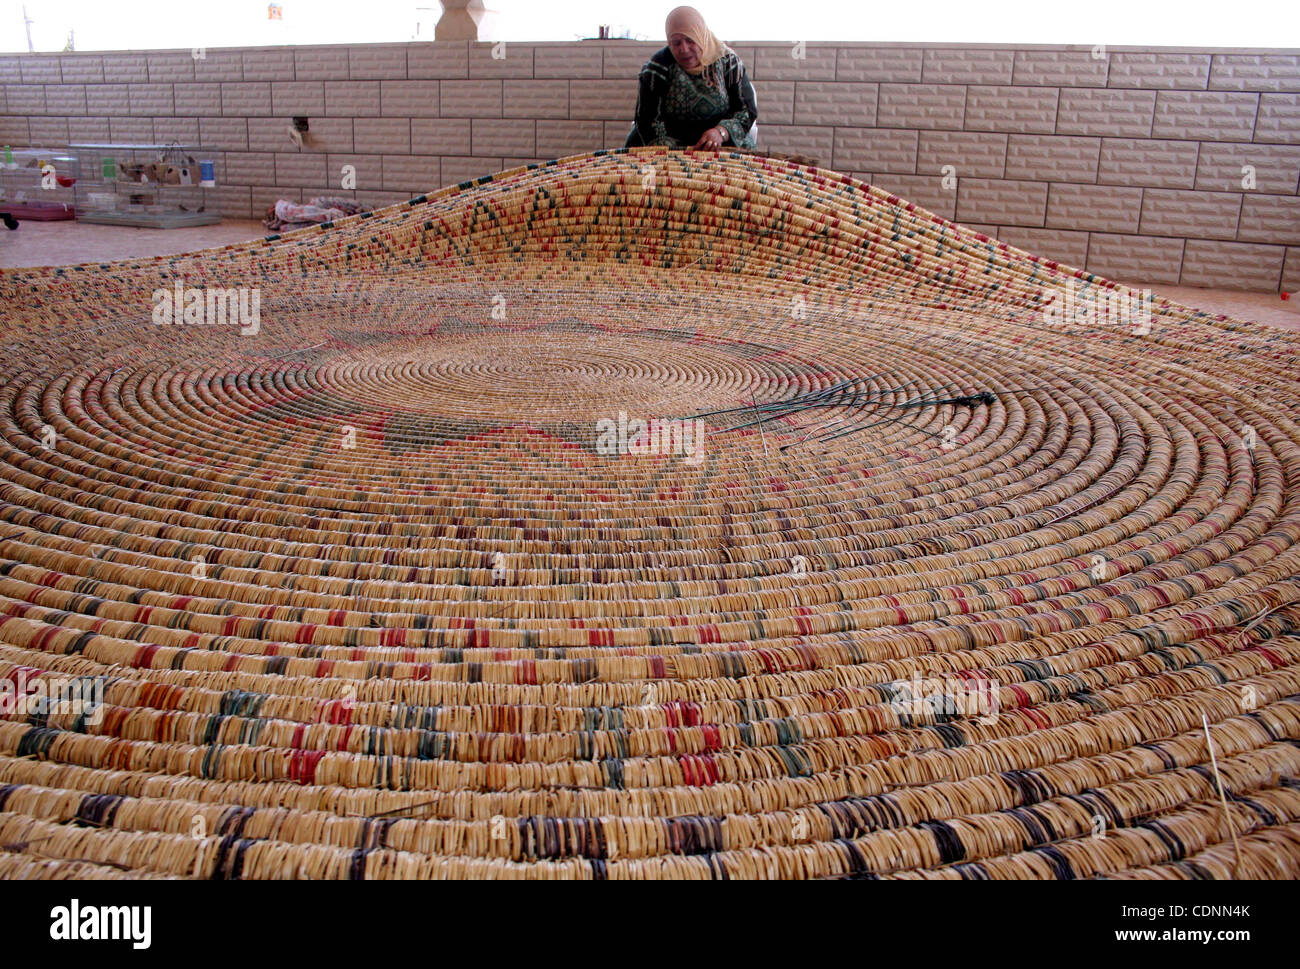 Jun 20, 2011 - Ramallah, West Bank - An elderly Palestinian woman, RASELAH ABED AL-HAFEZ, 70, prepares what she calls the biggest hay traditional dish, hoping to make it into the Guinness Book of Records. (Credit Image: © Issam Rimawi/apaimages/ZUMAPRESS.com) Stock Photo